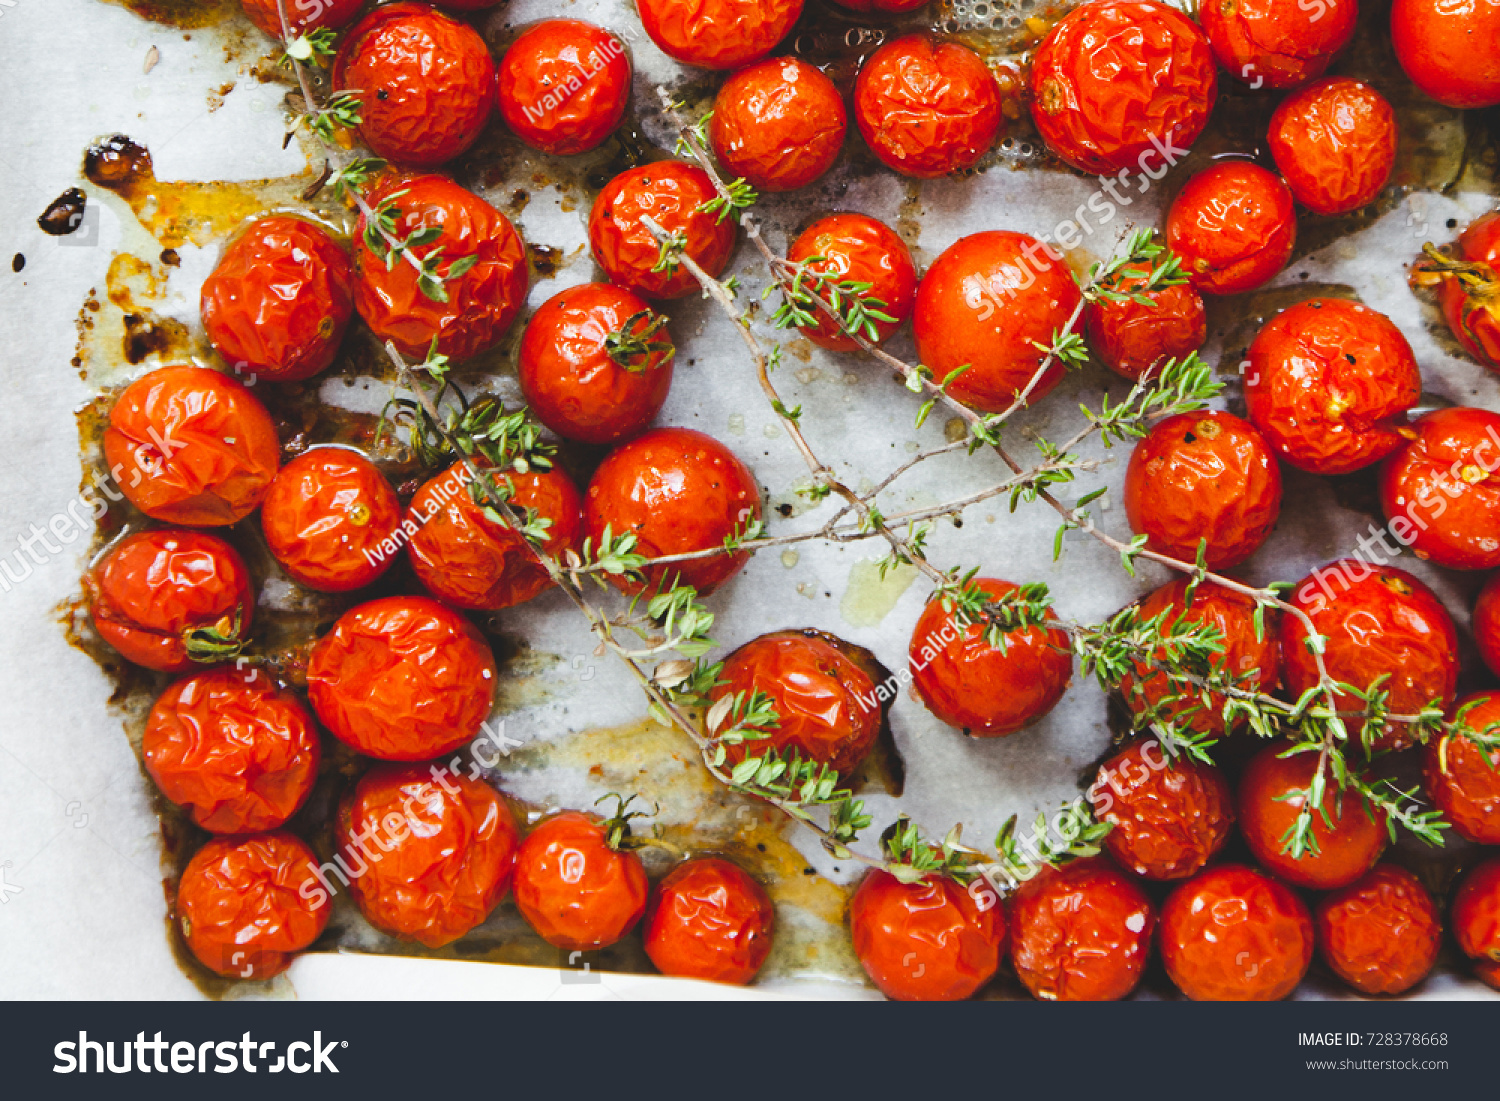 Roasted cherry tomatoes #728378668